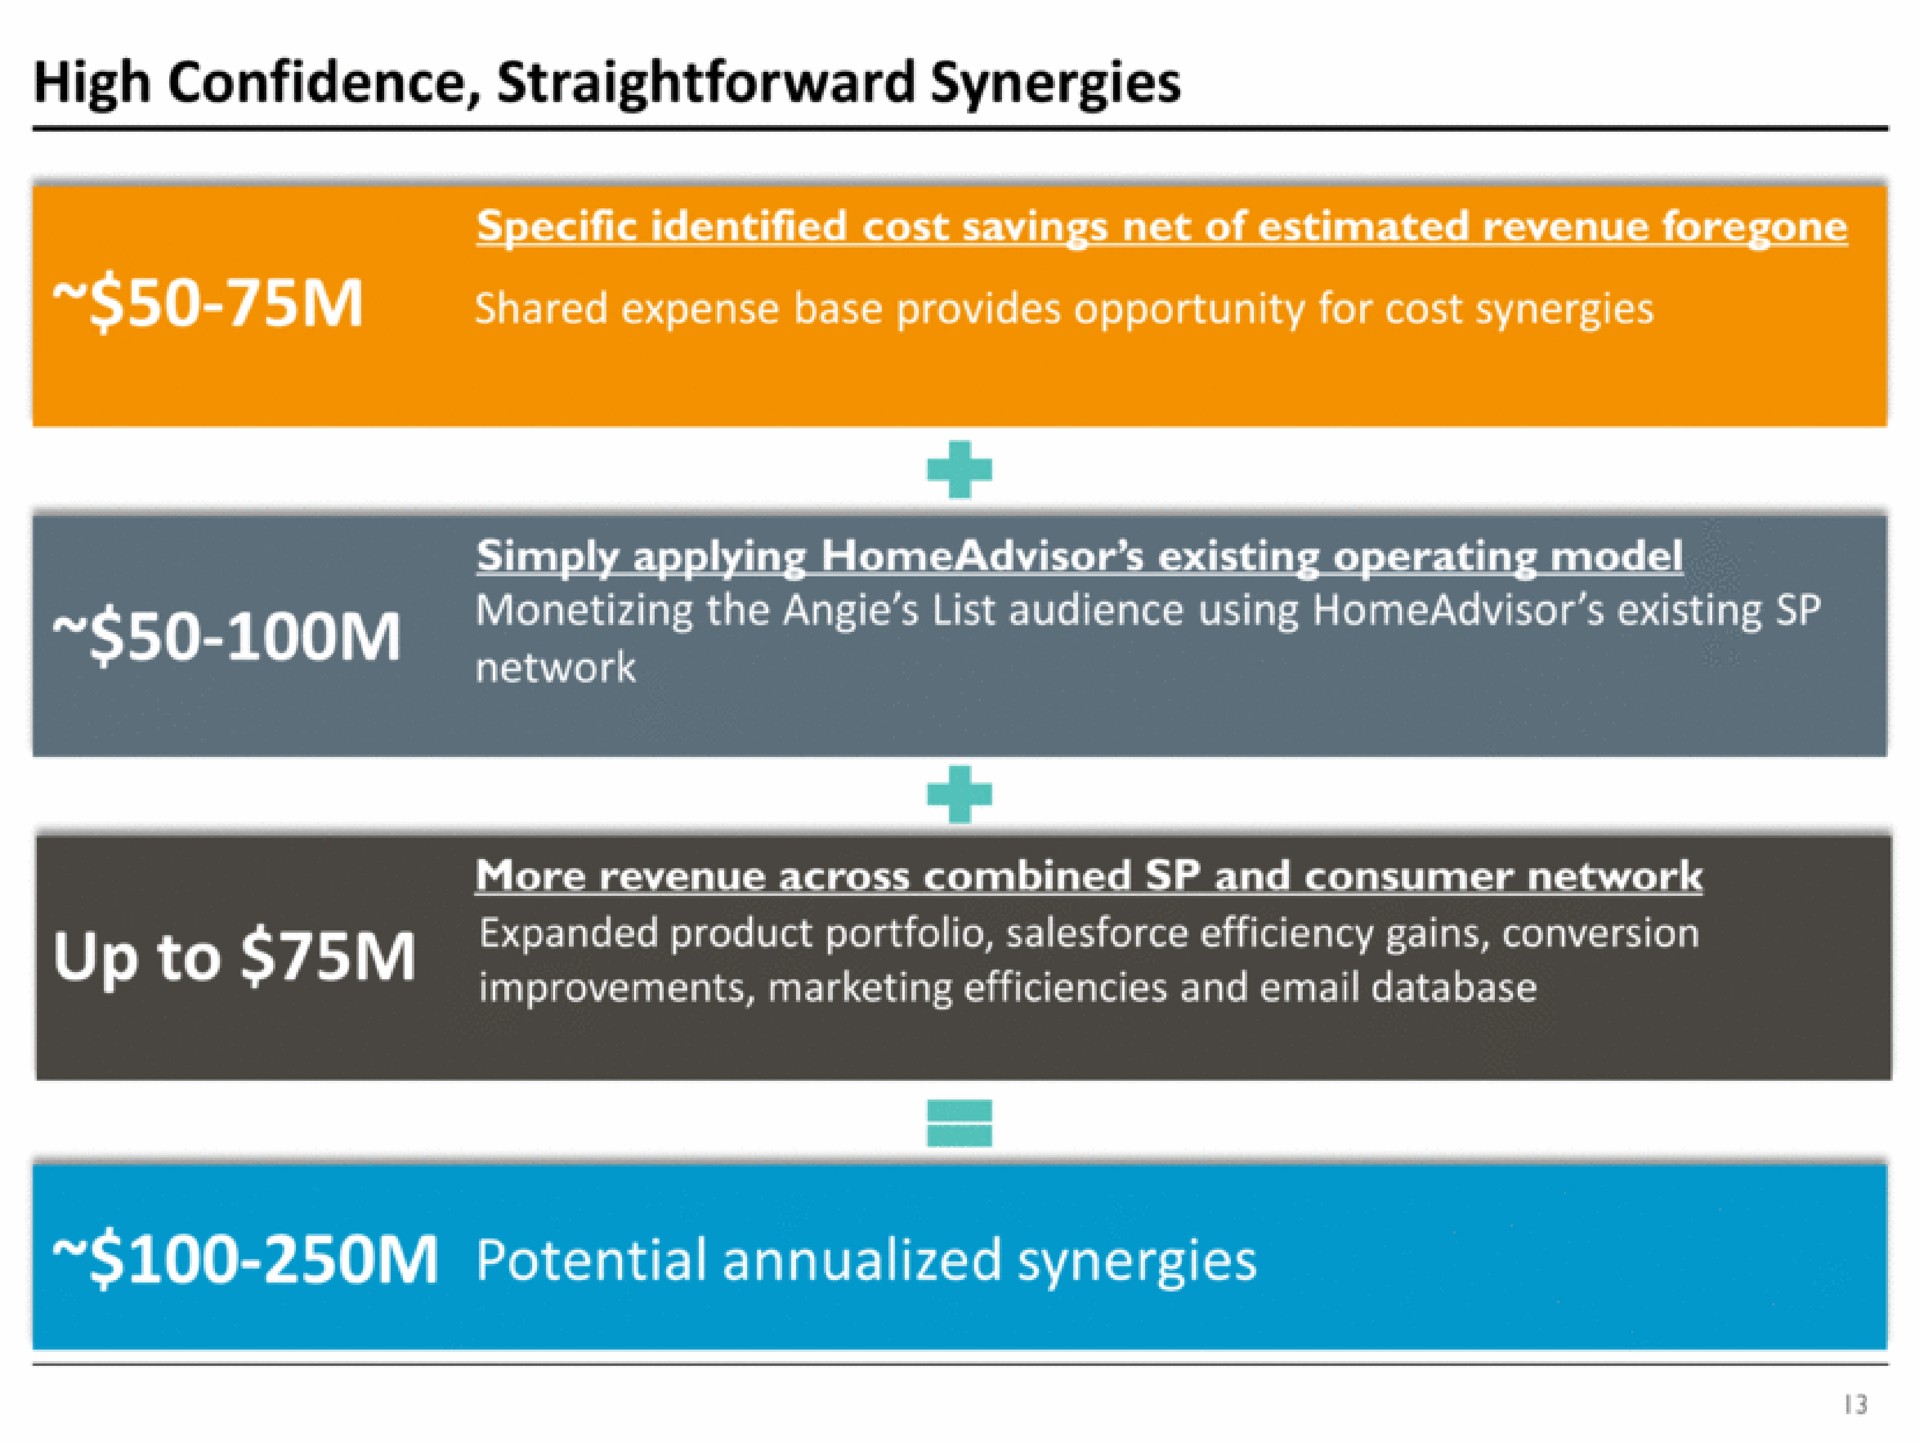 high confidence straightforward synergies shared expense base provides opportunity for cost synergies network up to expanded product portfolio efficiency gains conversion potential synergies | IAC